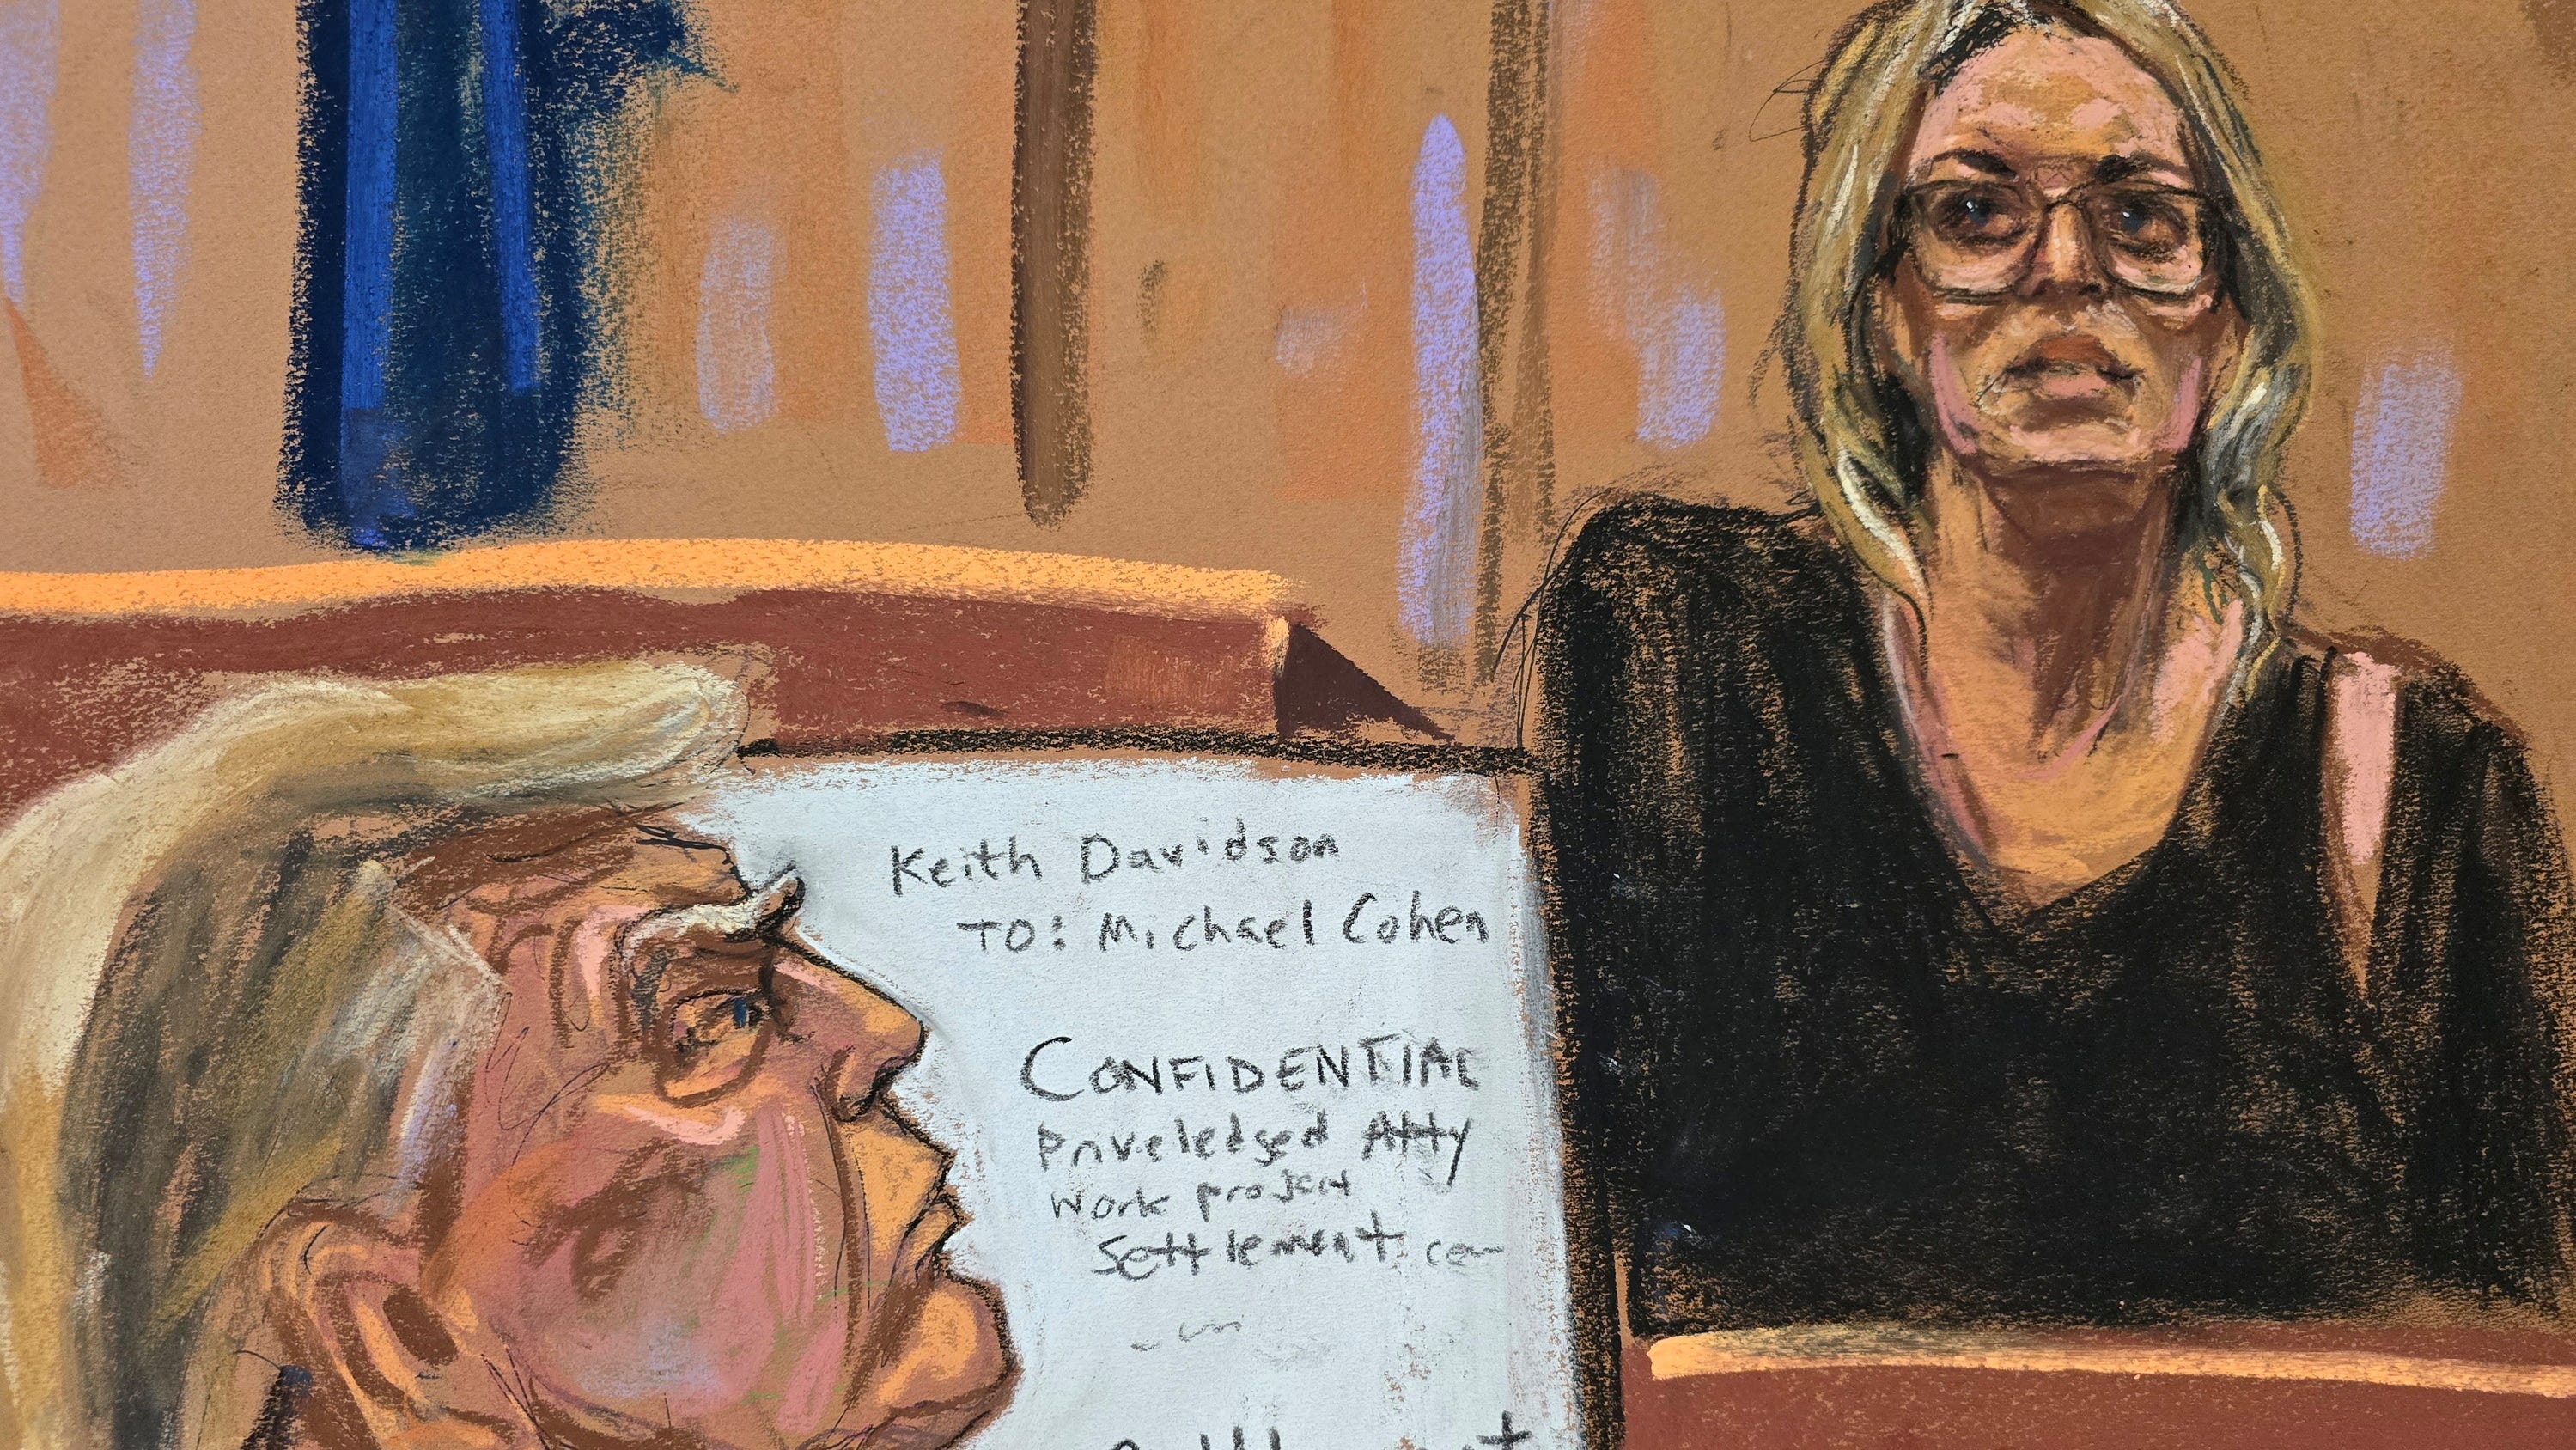 Trump trial live: Stormy Daniels pressed about alleged inconsistencies